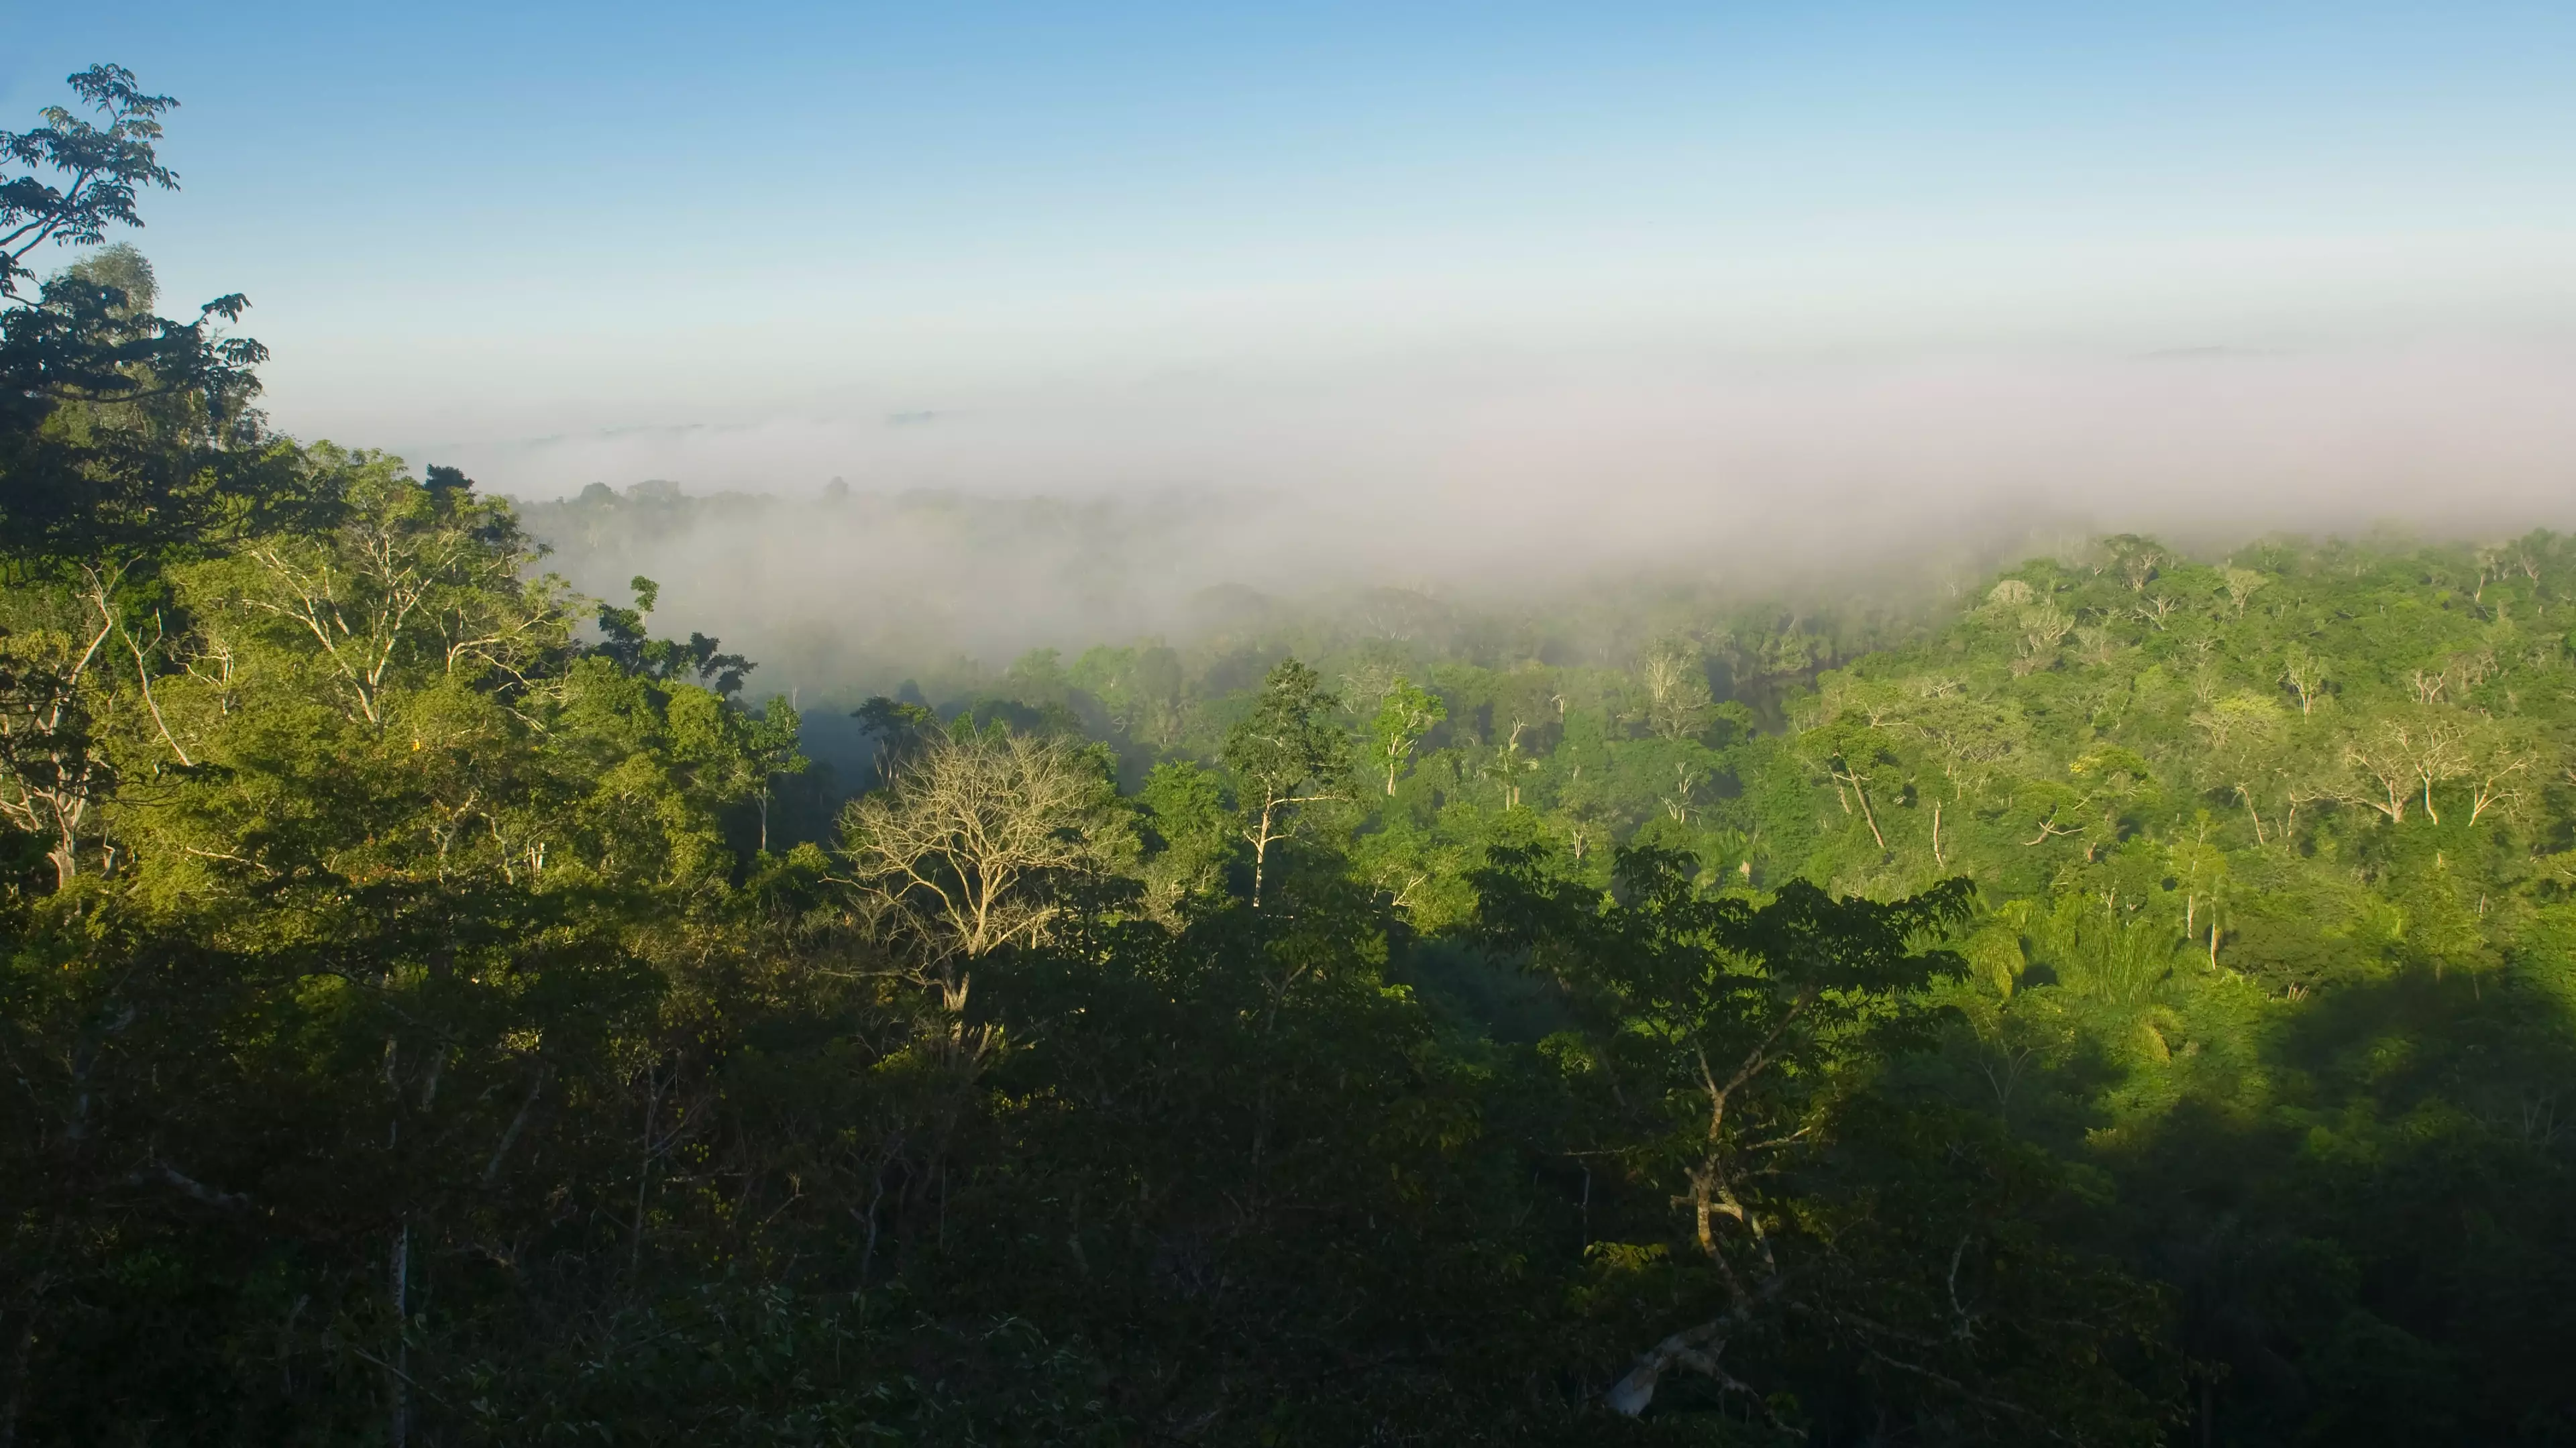 Amazon Rainforest Could Be Worsening Climate Change, New Study Suggests